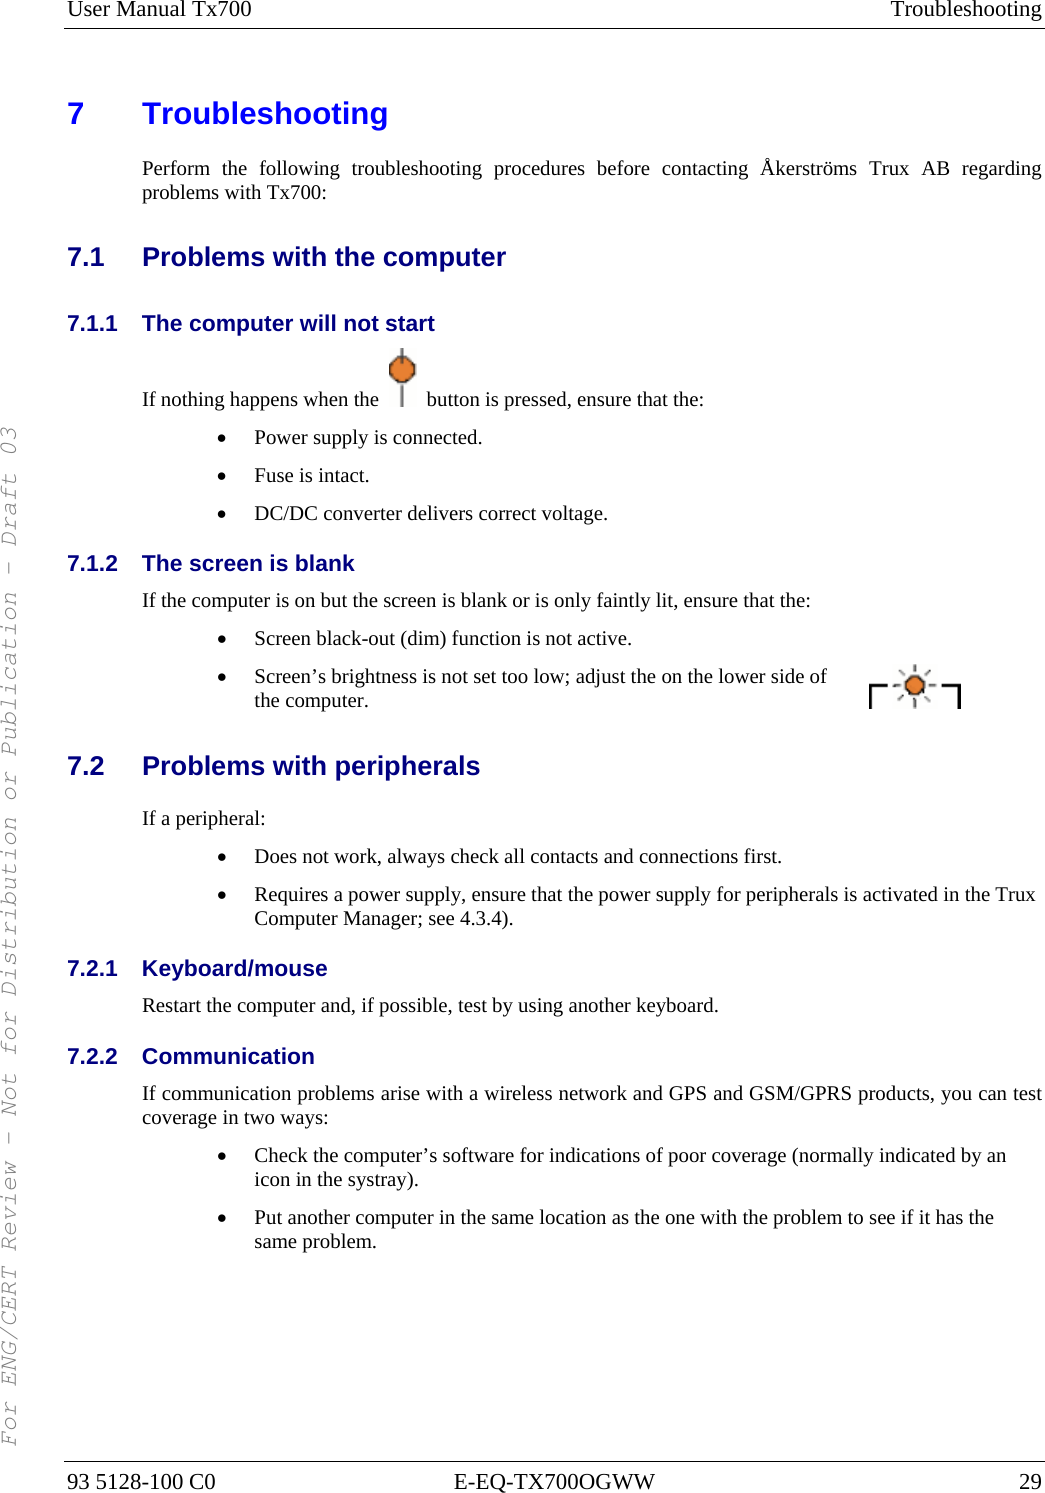 User Manual Tx700  Troubleshooting 93 5128-100 C0  E-EQ-TX700OGWW  29 7 Troubleshooting Perform the following troubleshooting procedures before contacting Åkerströms Trux AB regarding problems with Tx700: 7.1  Problems with the computer 7.1.1  The computer will not start If nothing happens when the    button is pressed, ensure that the: • Power supply is connected. • Fuse is intact. • DC/DC converter delivers correct voltage. 7.1.2  The screen is blank If the computer is on but the screen is blank or is only faintly lit, ensure that the: • Screen black-out (dim) function is not active. • Screen’s brightness is not set too low; adjust the on the lower side of the computer. 7.2  Problems with peripherals If a peripheral: • Does not work, always check all contacts and connections first. • Requires a power supply, ensure that the power supply for peripherals is activated in the Trux Computer Manager; see 4.3.4). 7.2.1 Keyboard/mouse Restart the computer and, if possible, test by using another keyboard. 7.2.2 Communication If communication problems arise with a wireless network and GPS and GSM/GPRS products, you can test coverage in two ways: • Check the computer’s software for indications of poor coverage (normally indicated by an icon in the systray). • Put another computer in the same location as the one with the problem to see if it has the same problem.  For ENG/CERT Review - Not for Distribution or Publication - Draft 03